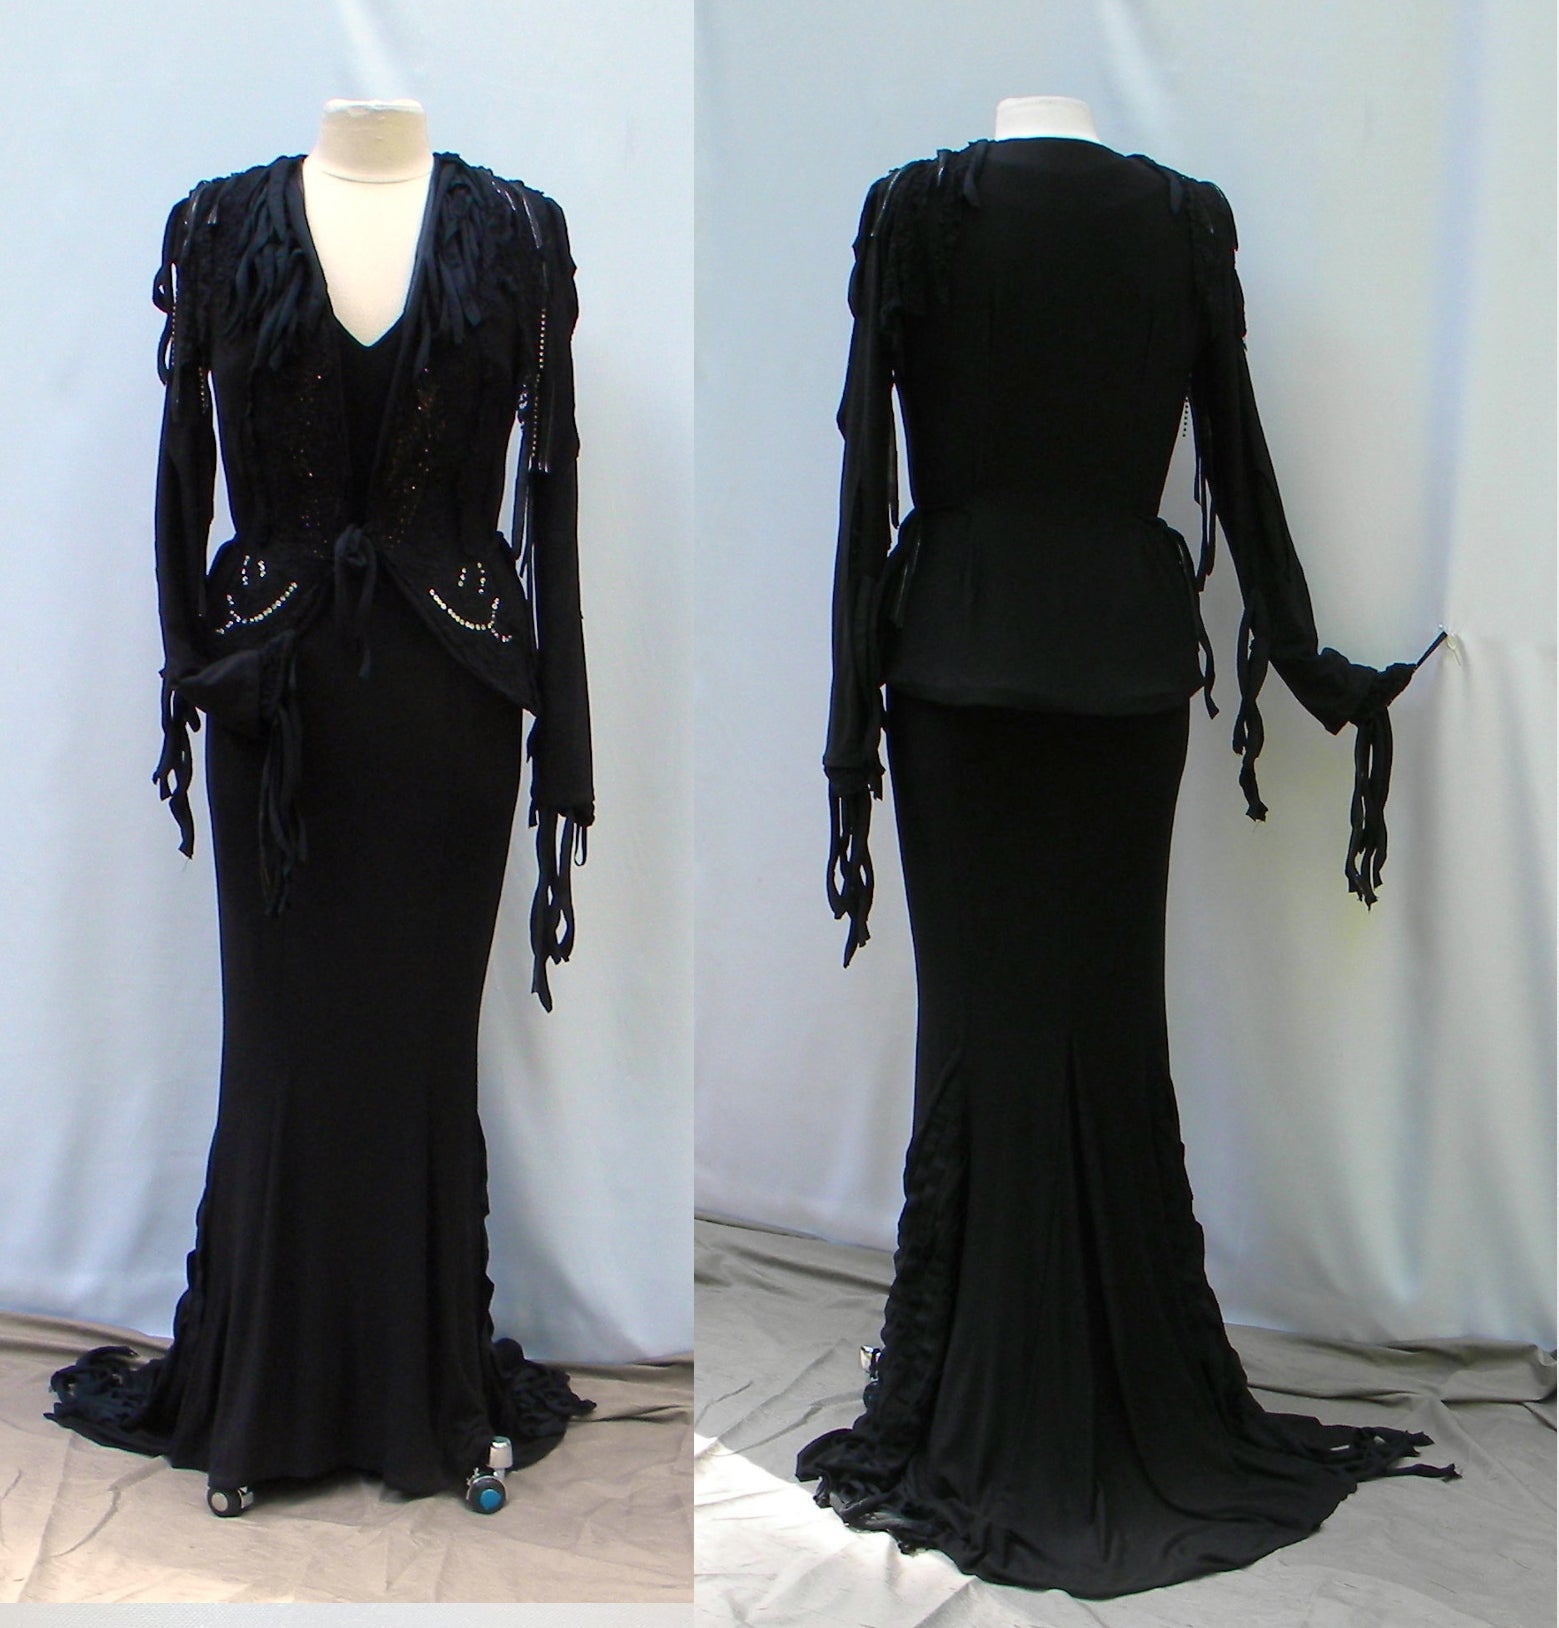 Morticia Addams Dress With Embellished Jacket – Erica's Creative Cavalcade